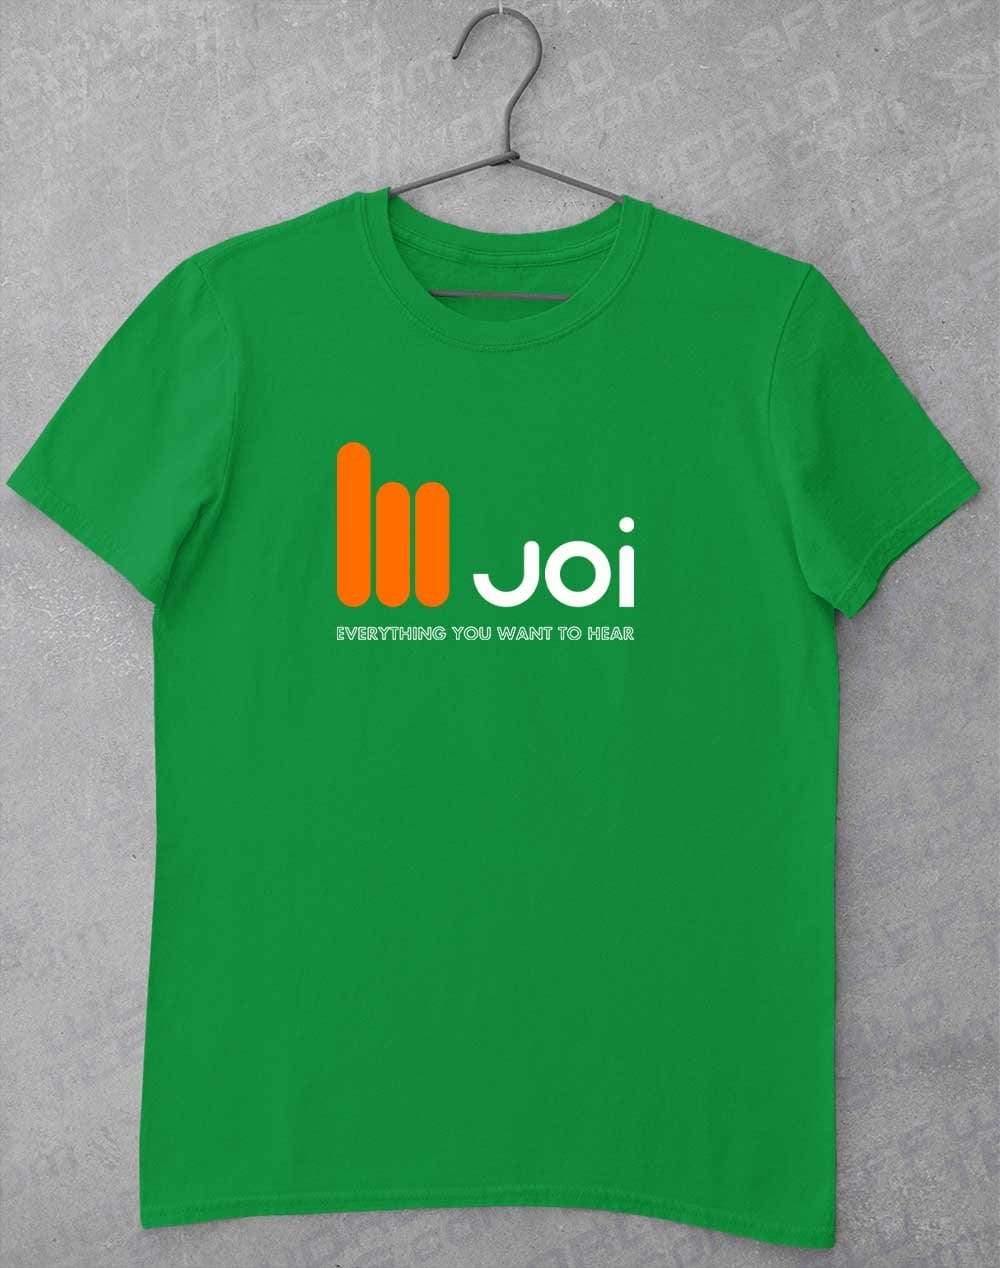 JOI Everything You Want to Hear T-Shirt S / Irish Green  - Off World Tees